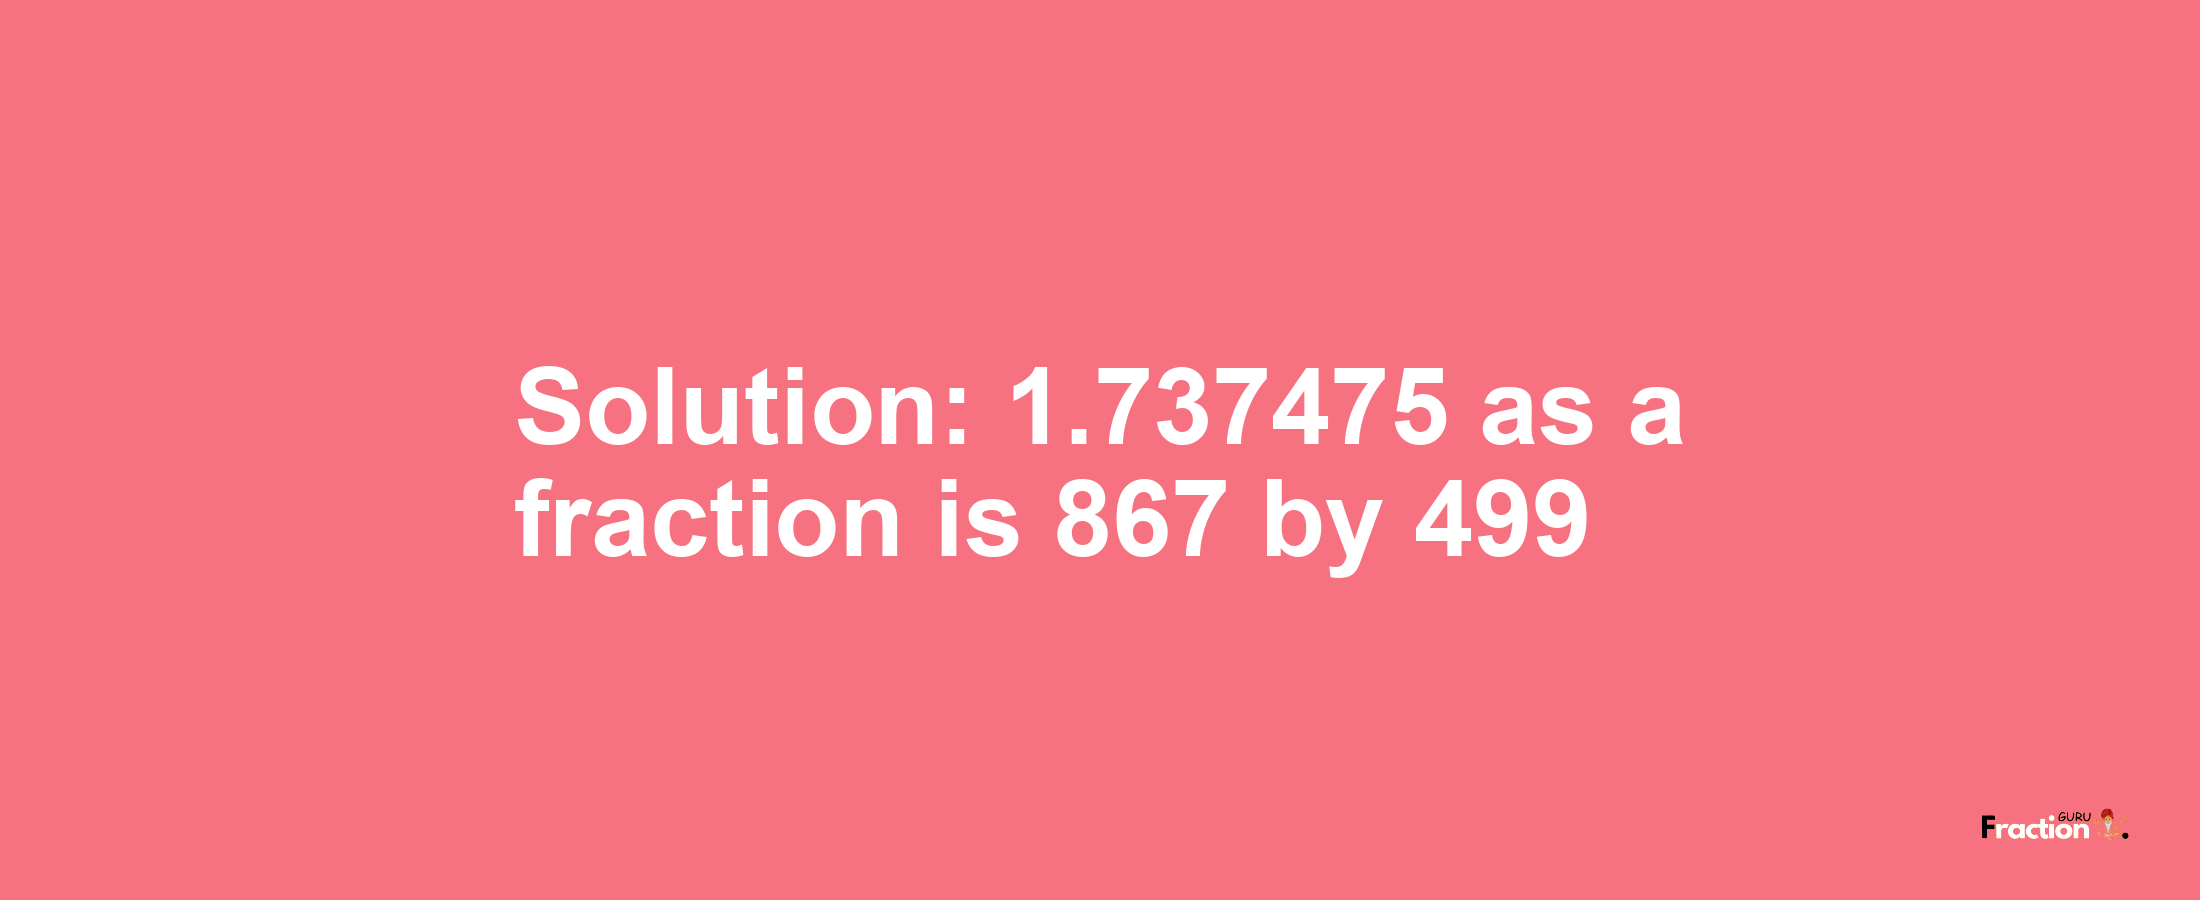 Solution:1.737475 as a fraction is 867/499